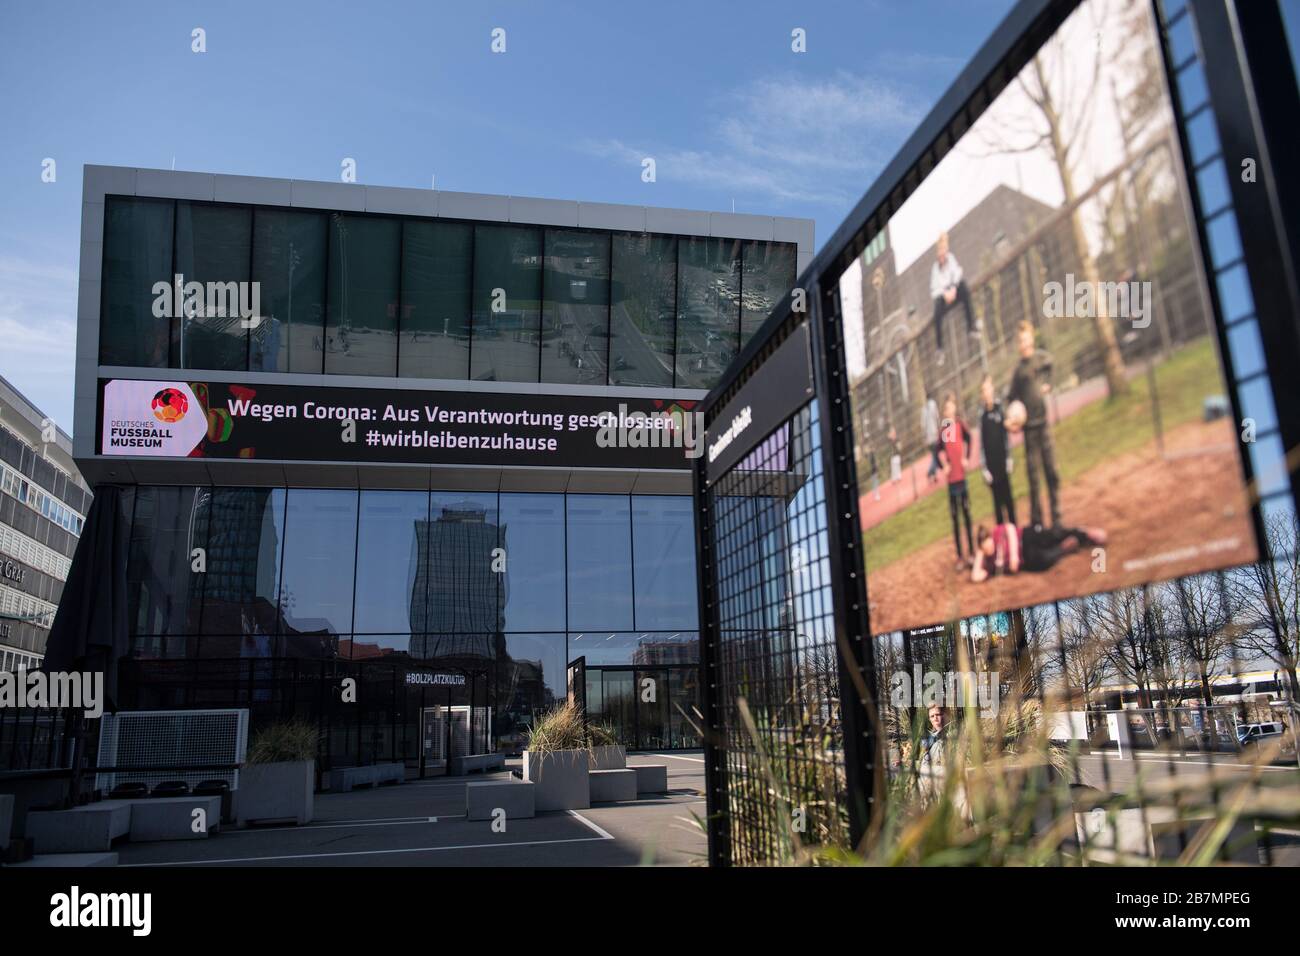 Dortmund, Germany. 17th Mar, 2020. The German Football Museum of the DFB writes on its LED band on the facade 'Wegen Corona: Aus Verantwortung geschlossen. #wirbleblezuhause', while a permanent exhibition on the forecourt shows a photo by Jörg Krüll showing five boys on a football field. Credit: Bernd Thissen/dpa/Alamy Live News Stock Photo